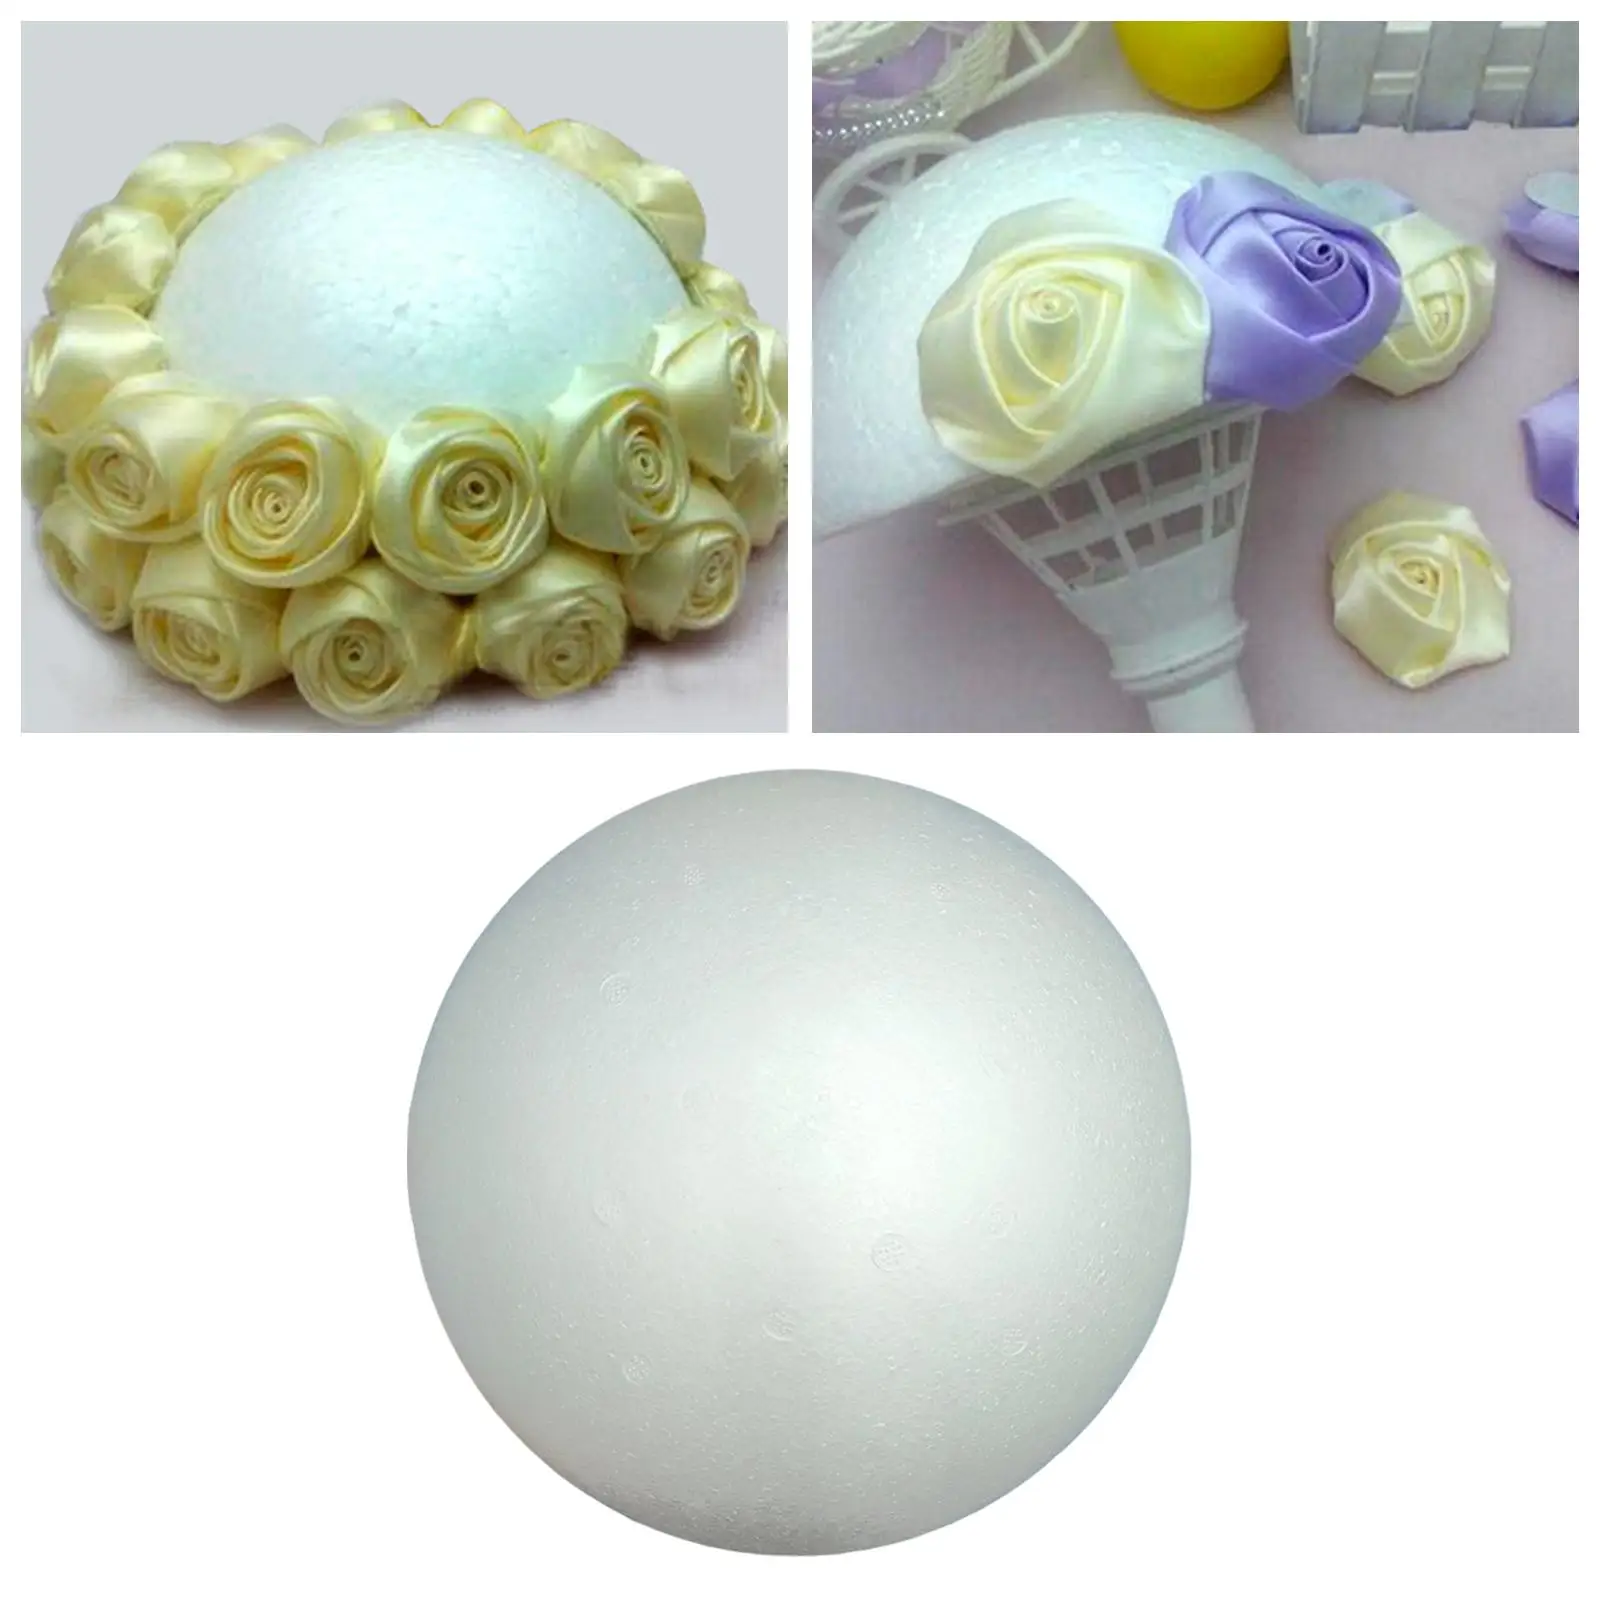 Foam Ball Half Round Mini Smooth School Supplies Toys 25cm for DIY Crafts Modeling Science Projects Decorations Birthday Wedding